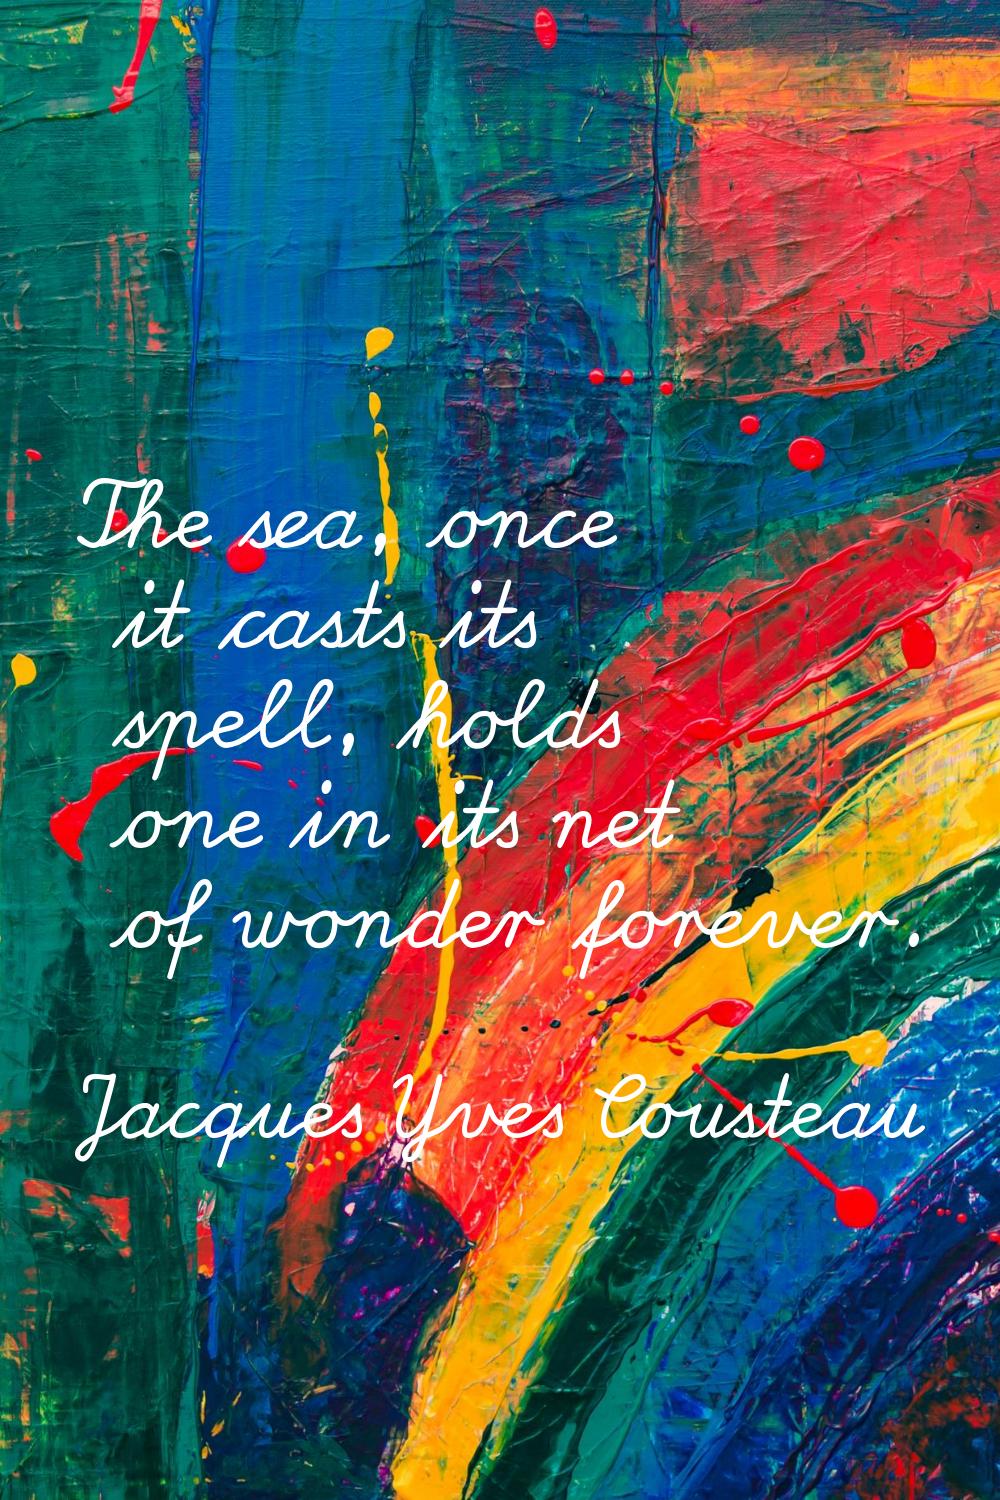 The sea, once it casts its spell, holds one in its net of wonder forever.